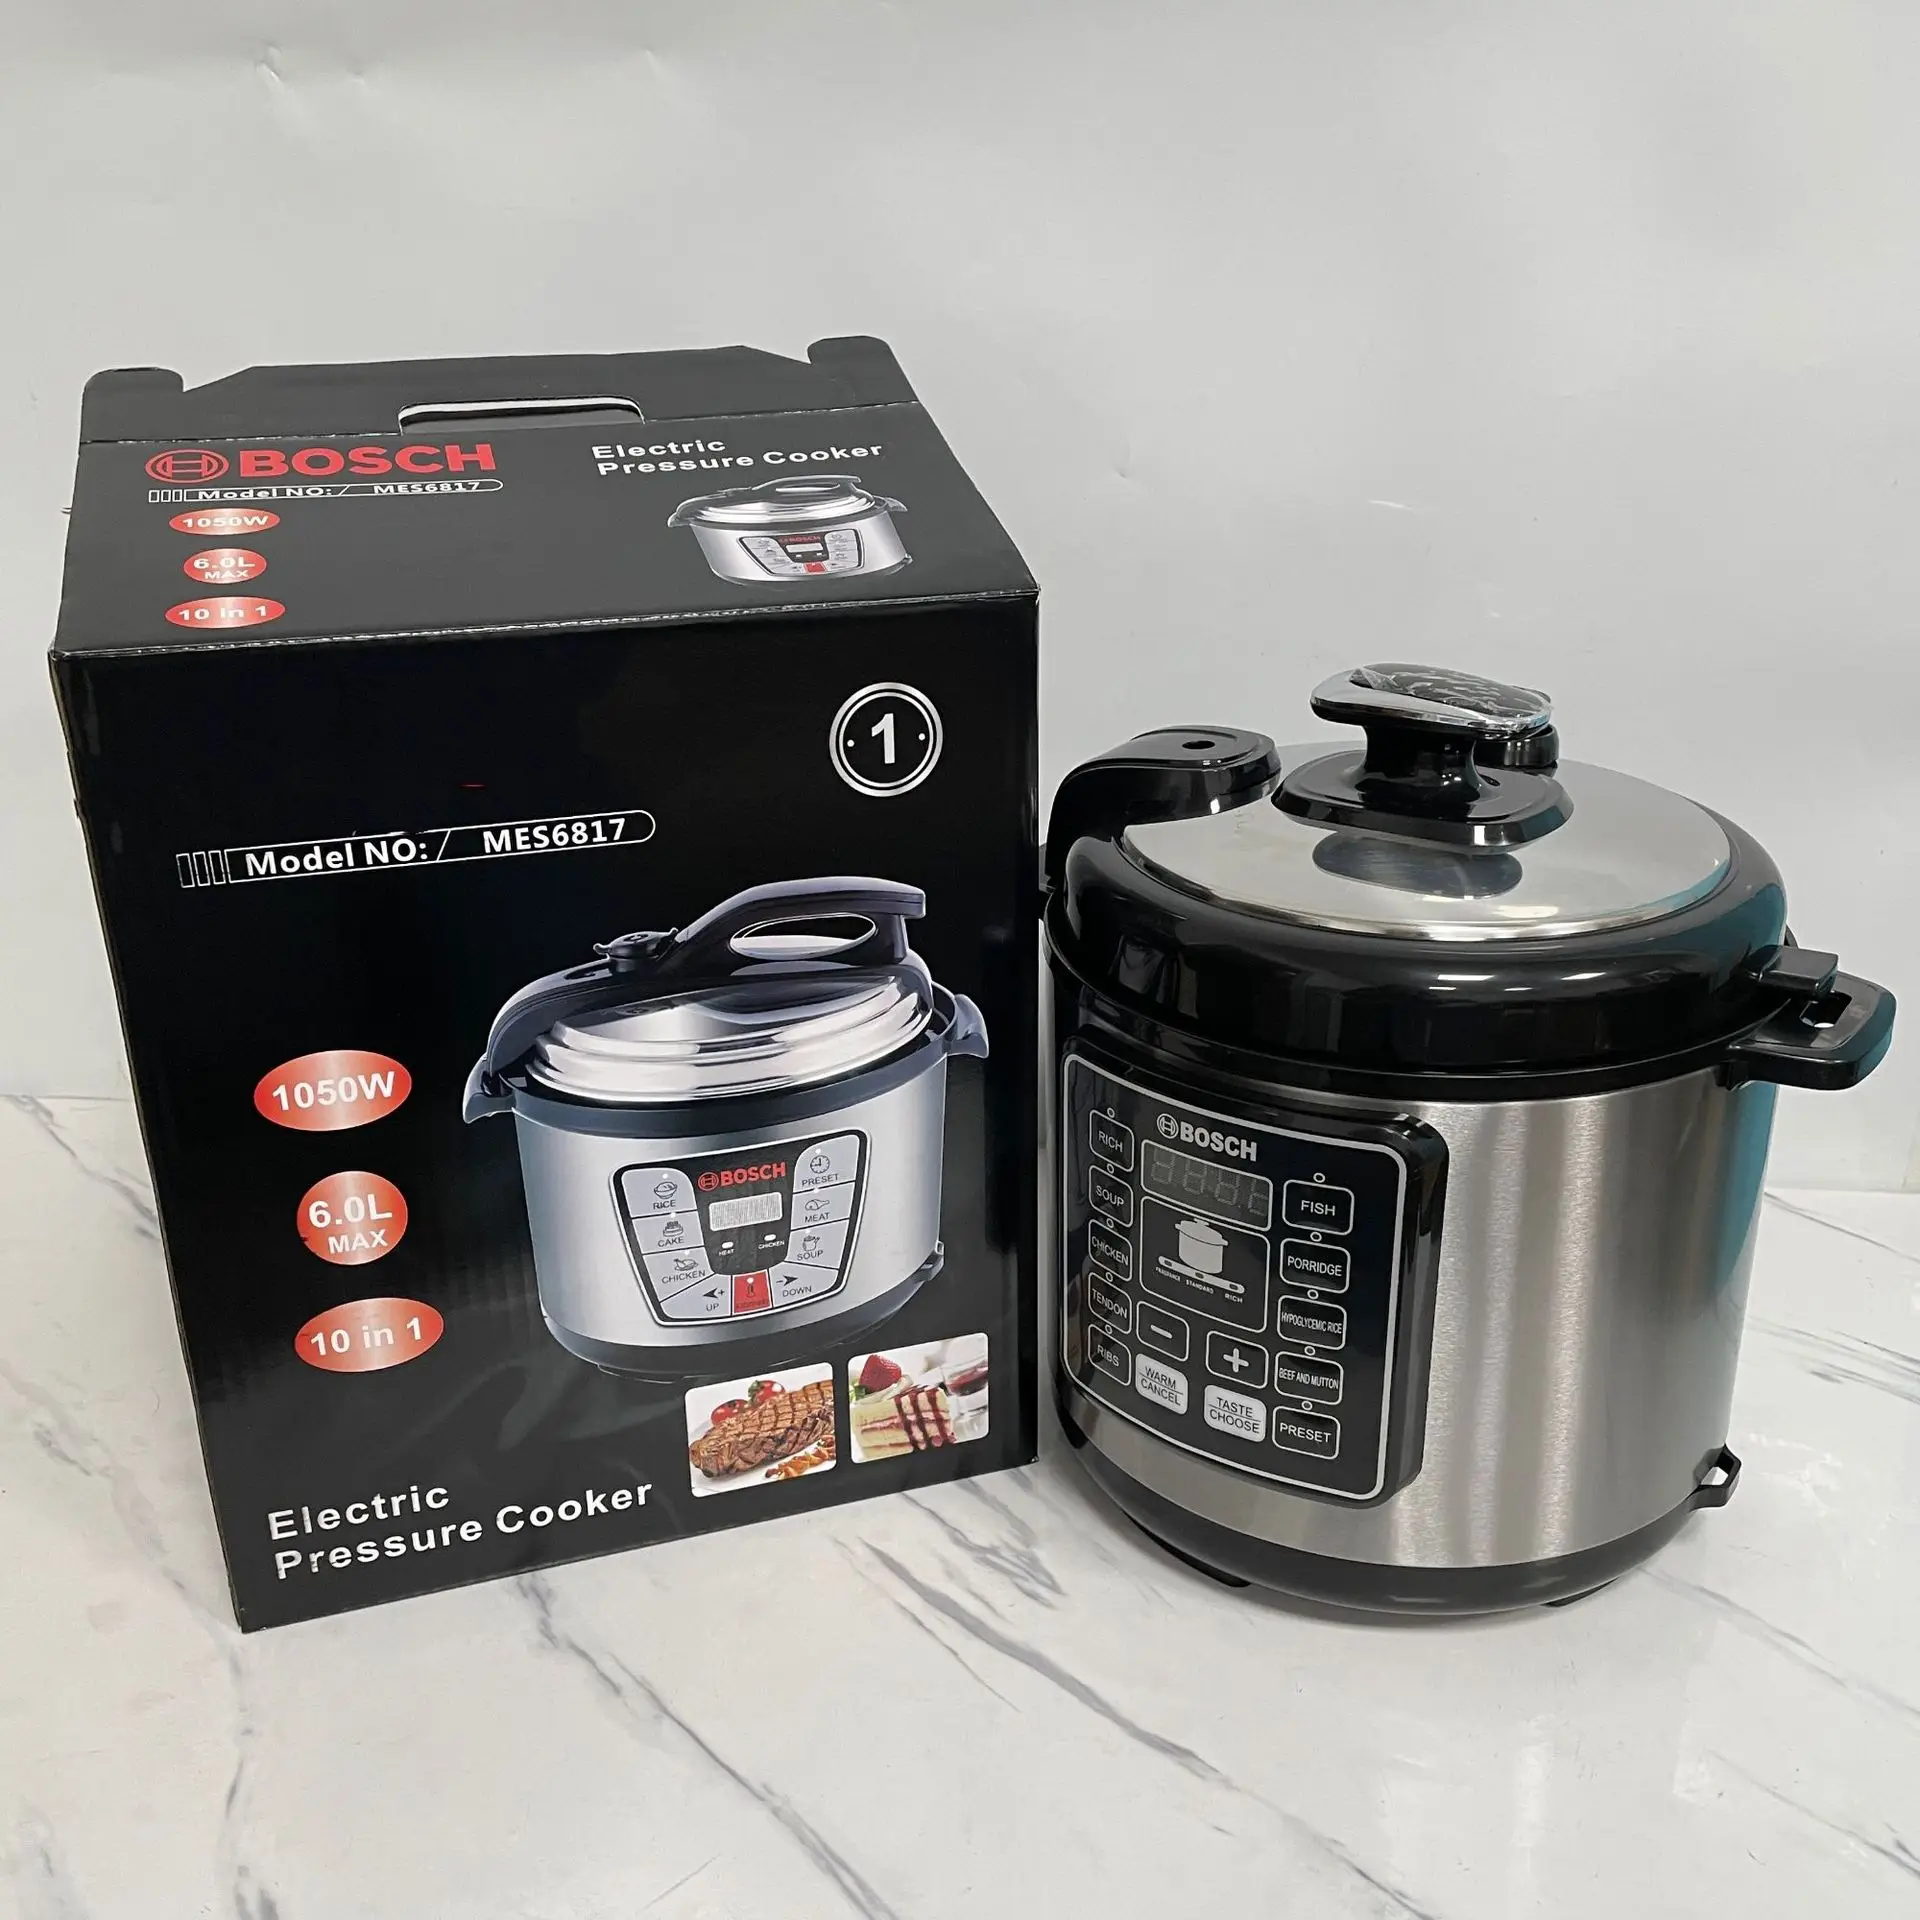 Aobosi Electric Multi-Cooker 6L/1000w Free Recipe Book and Extra Sealing Ring & Steamer Rack Digital Programmable Electric Pressure Cooker with BPA Free Stainless Steel Inner Pot 